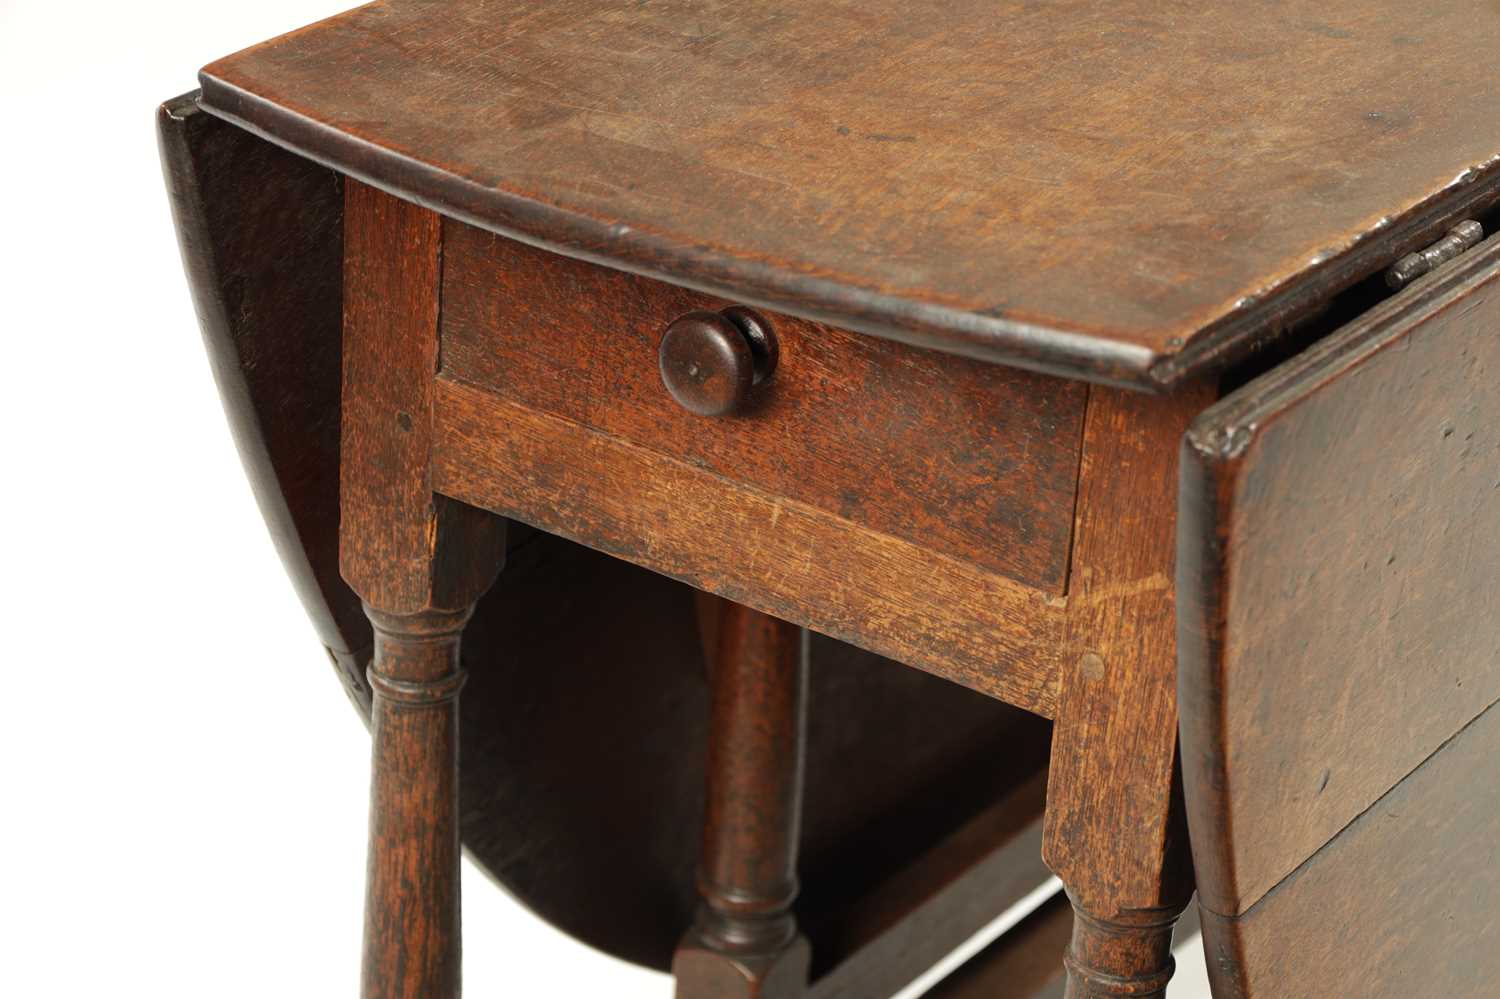 A LATE 17TH CENTURY OAK GATELEG TABLE WITH BREGANZA FEET - Image 3 of 6